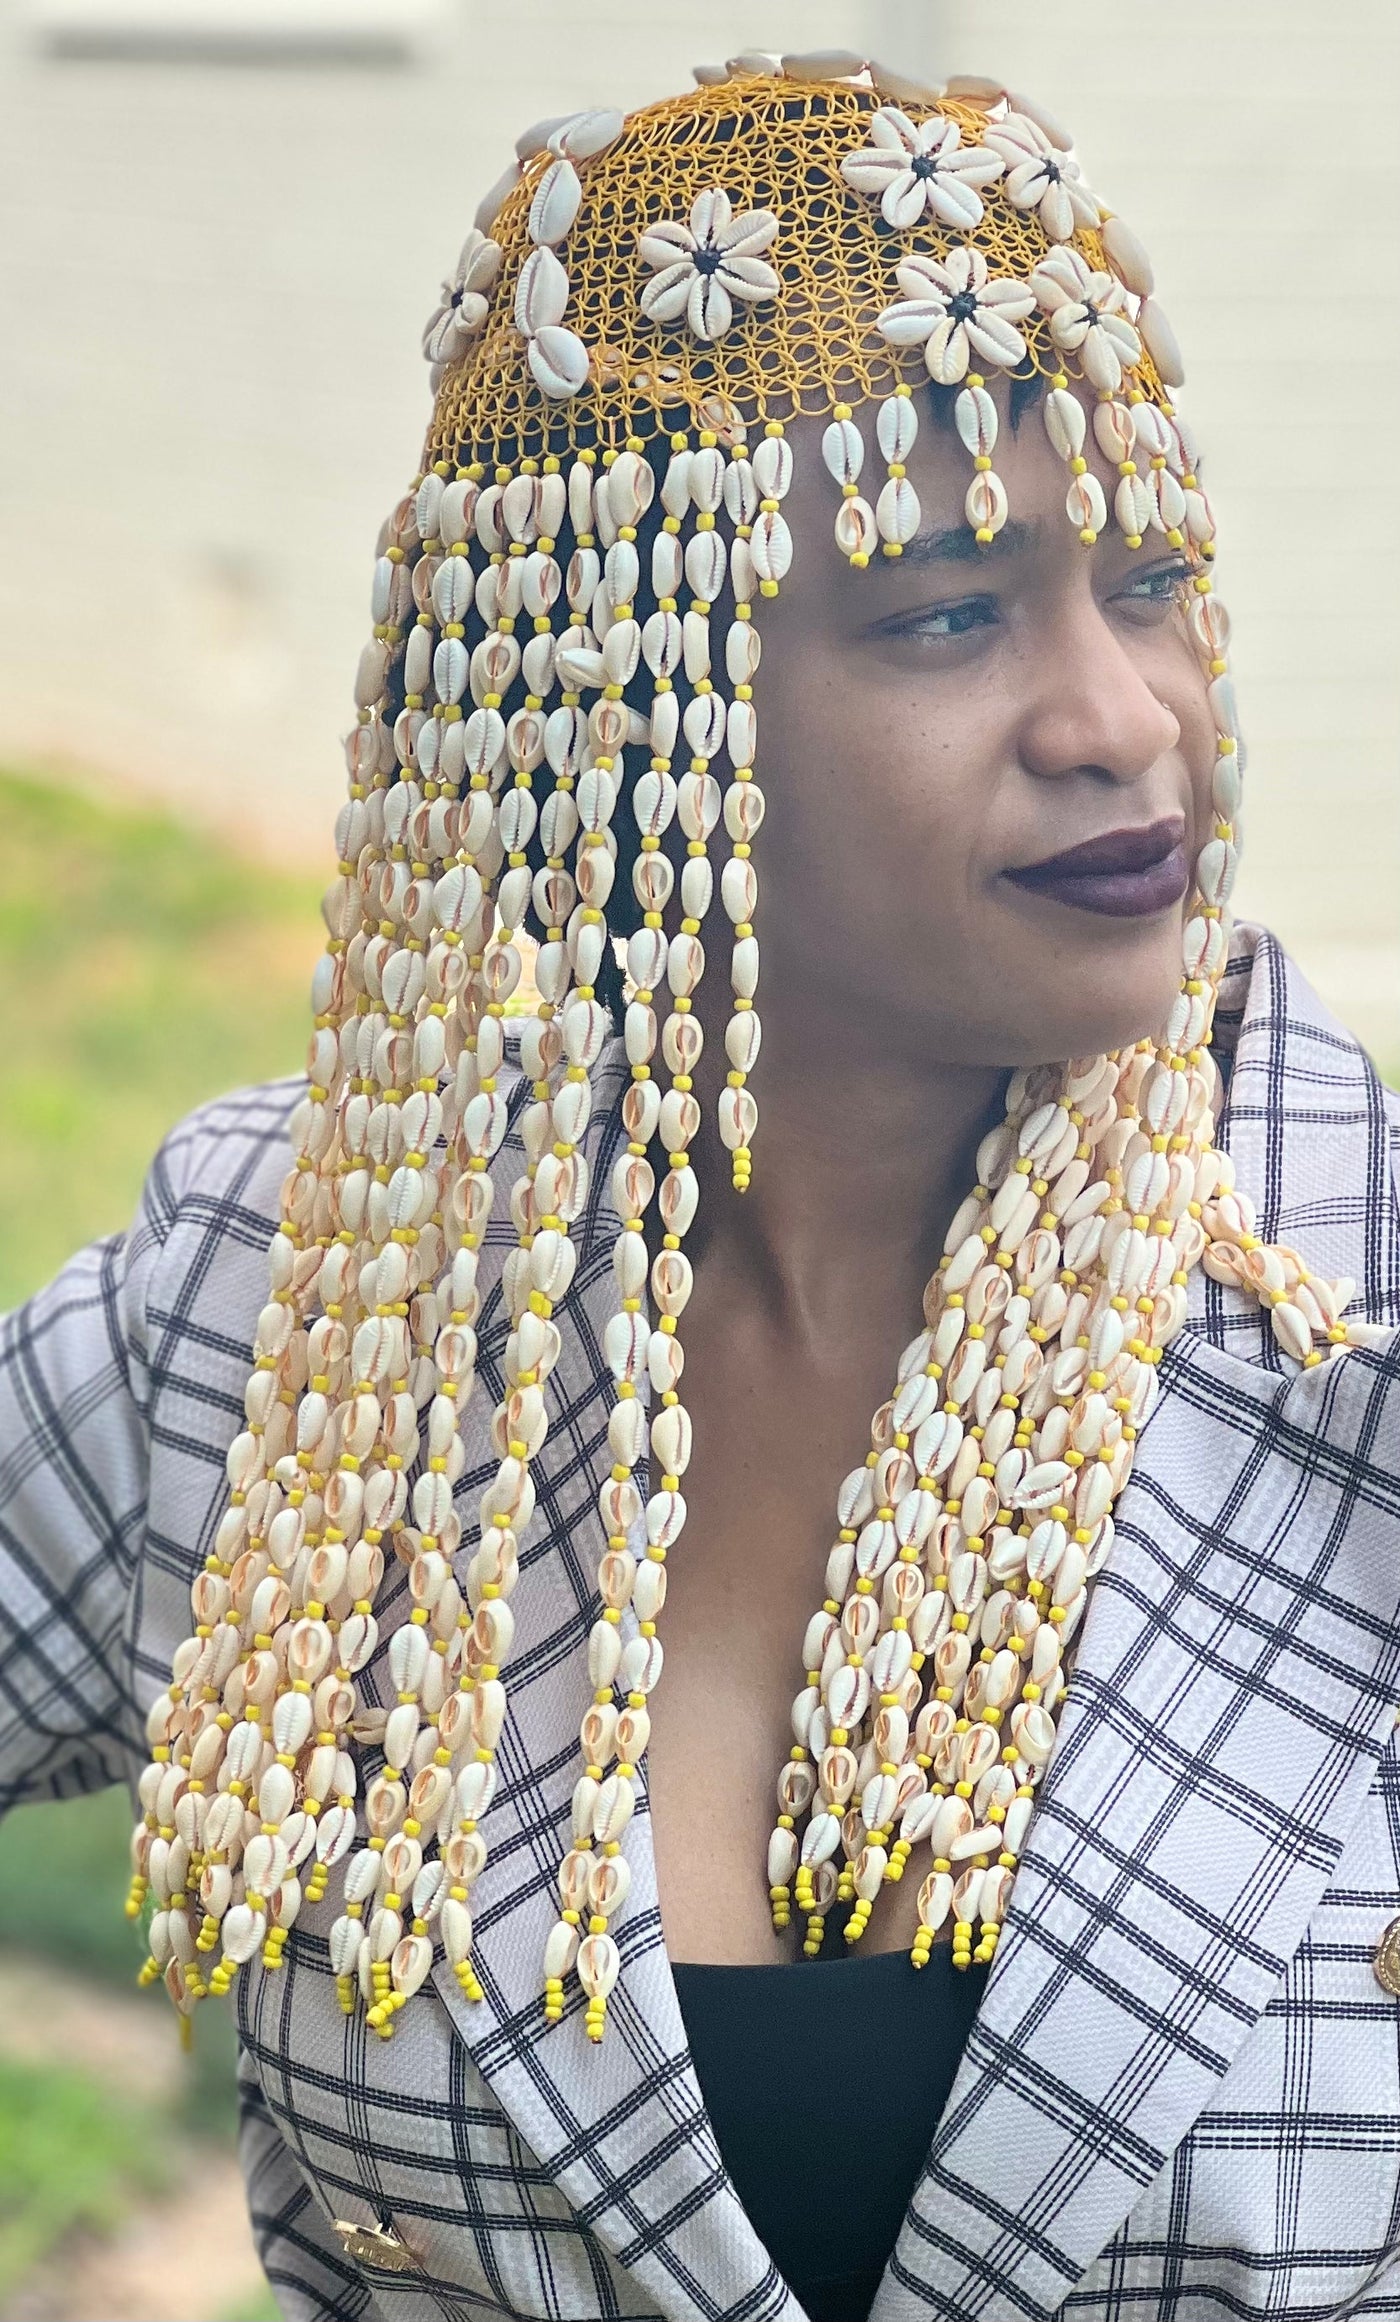 "Regal Reverie: Handmade Cleopatra-Inspired Cowrie Shells Head Piece - Embody African Royalty from Mali" (Wholesale)